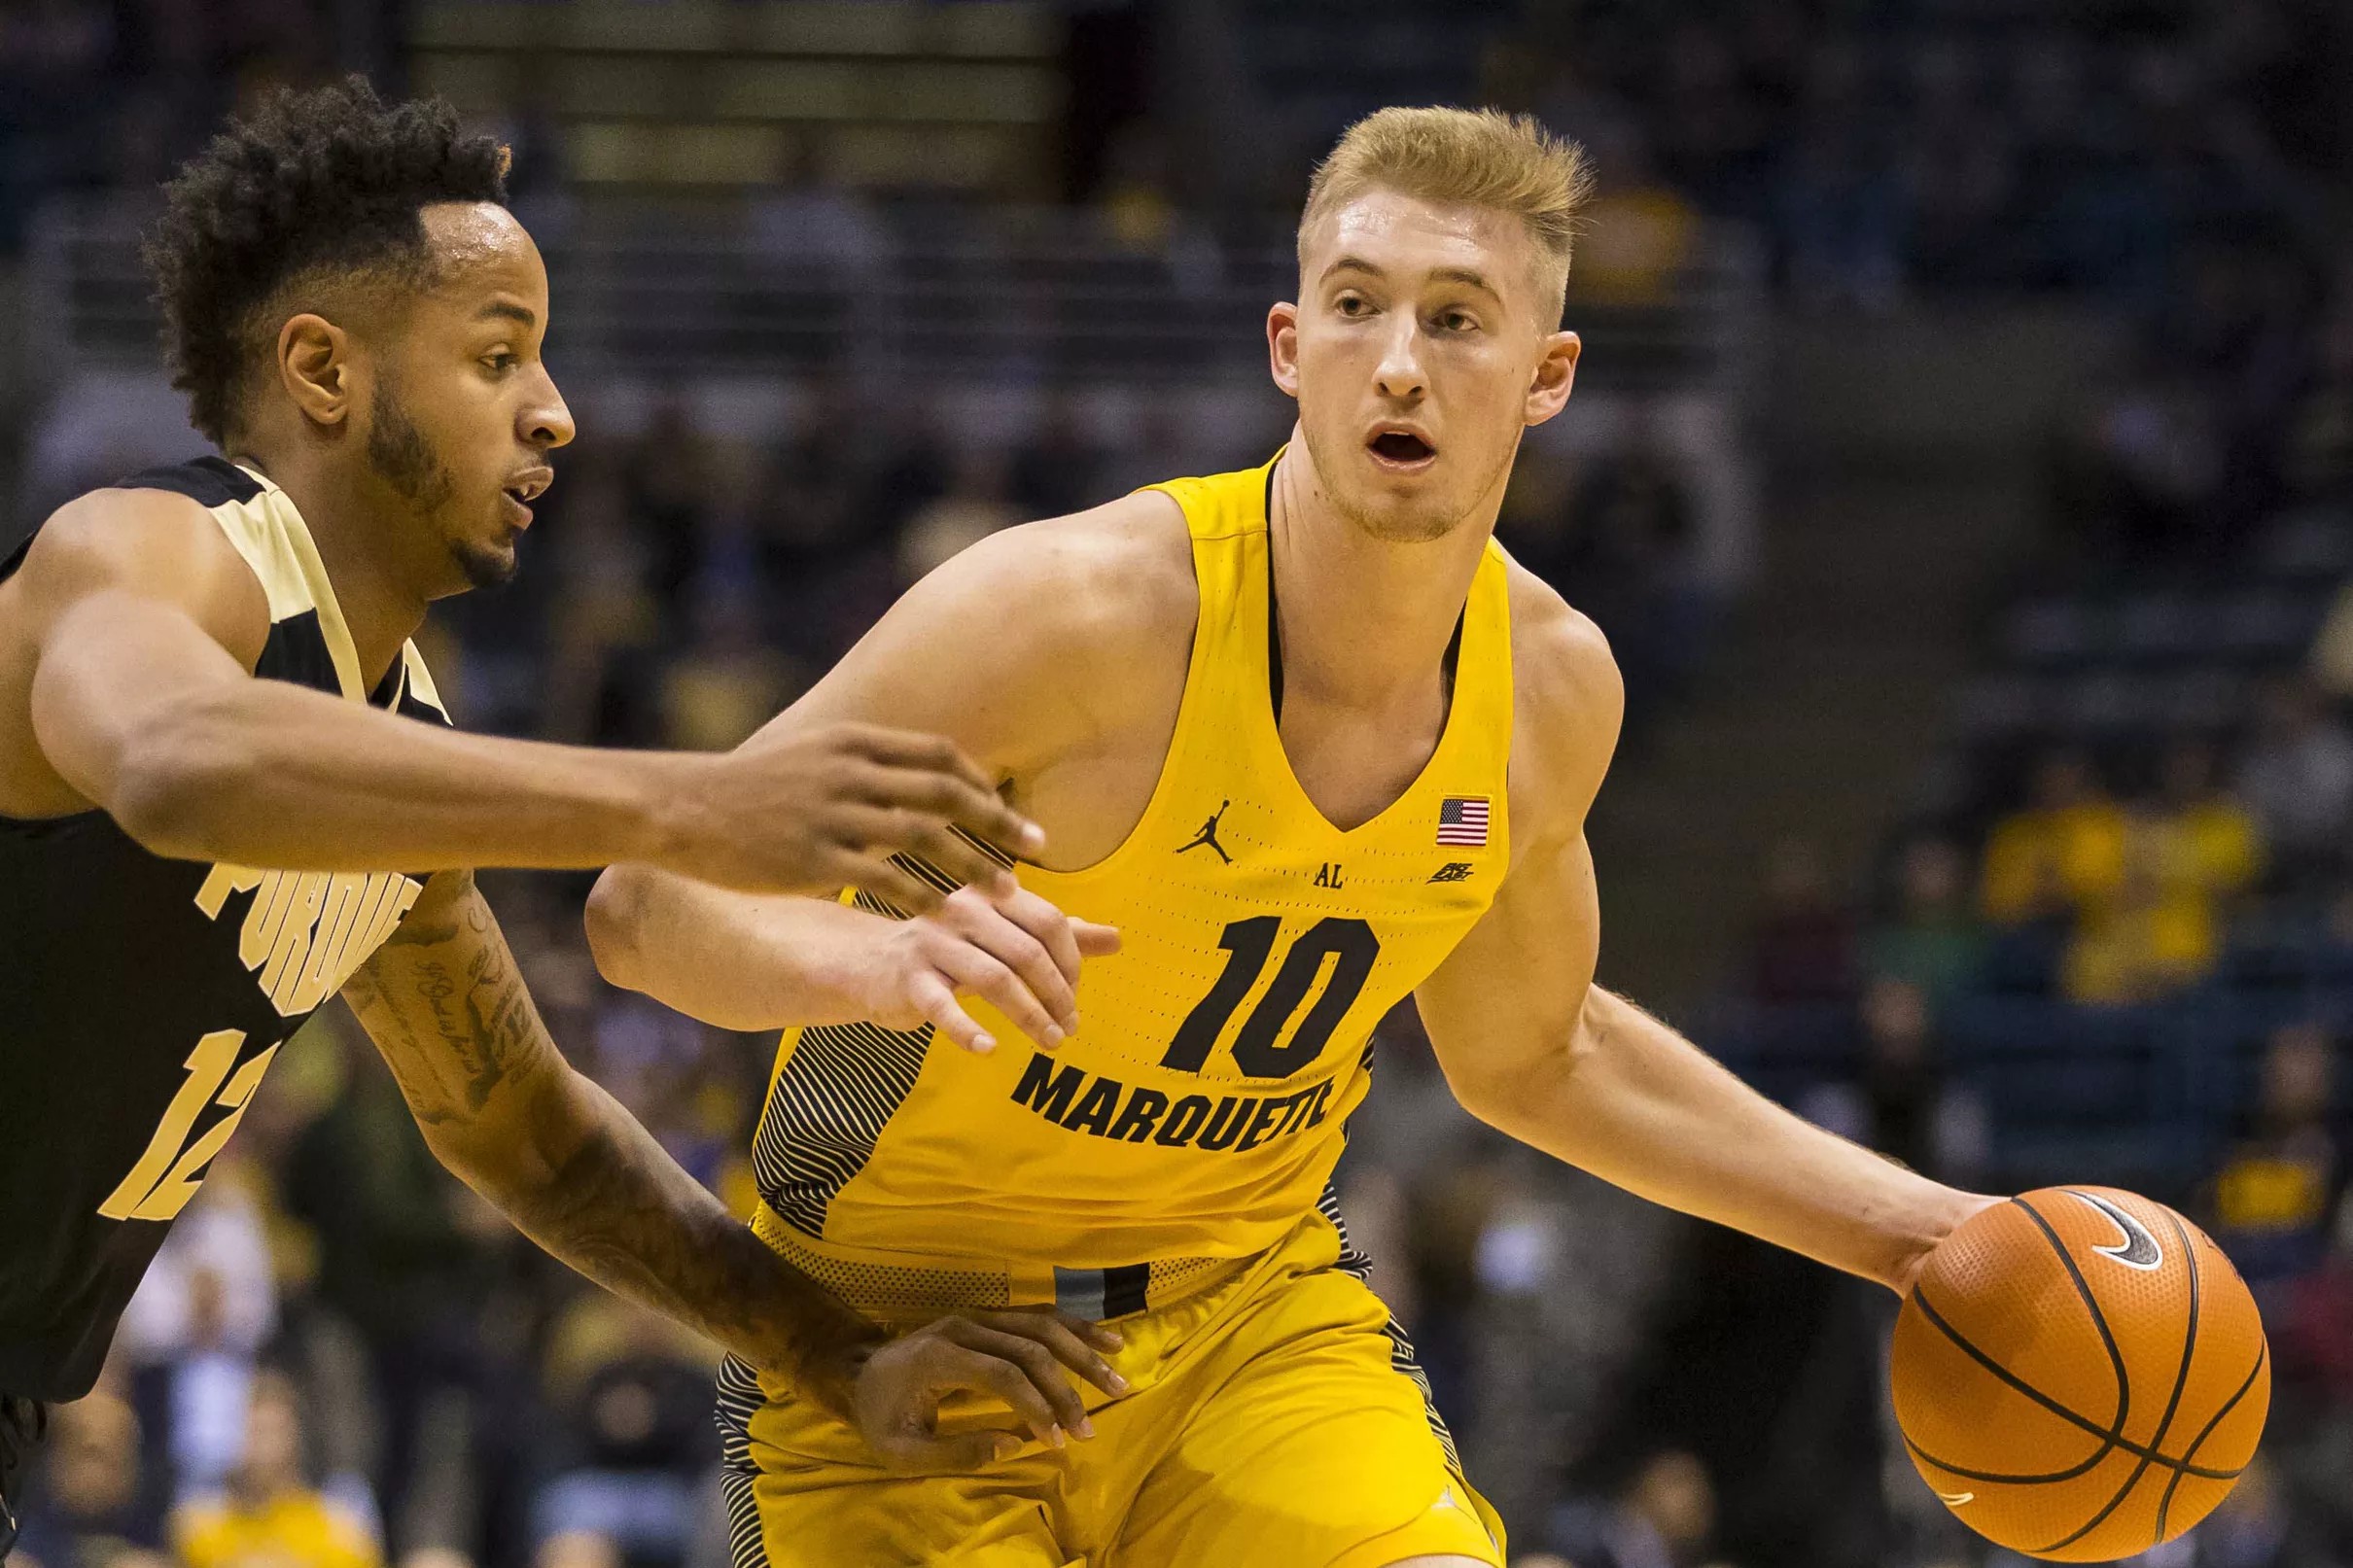 2018-19 Marquette Basketball Preview Roundtable: The Big East Standings